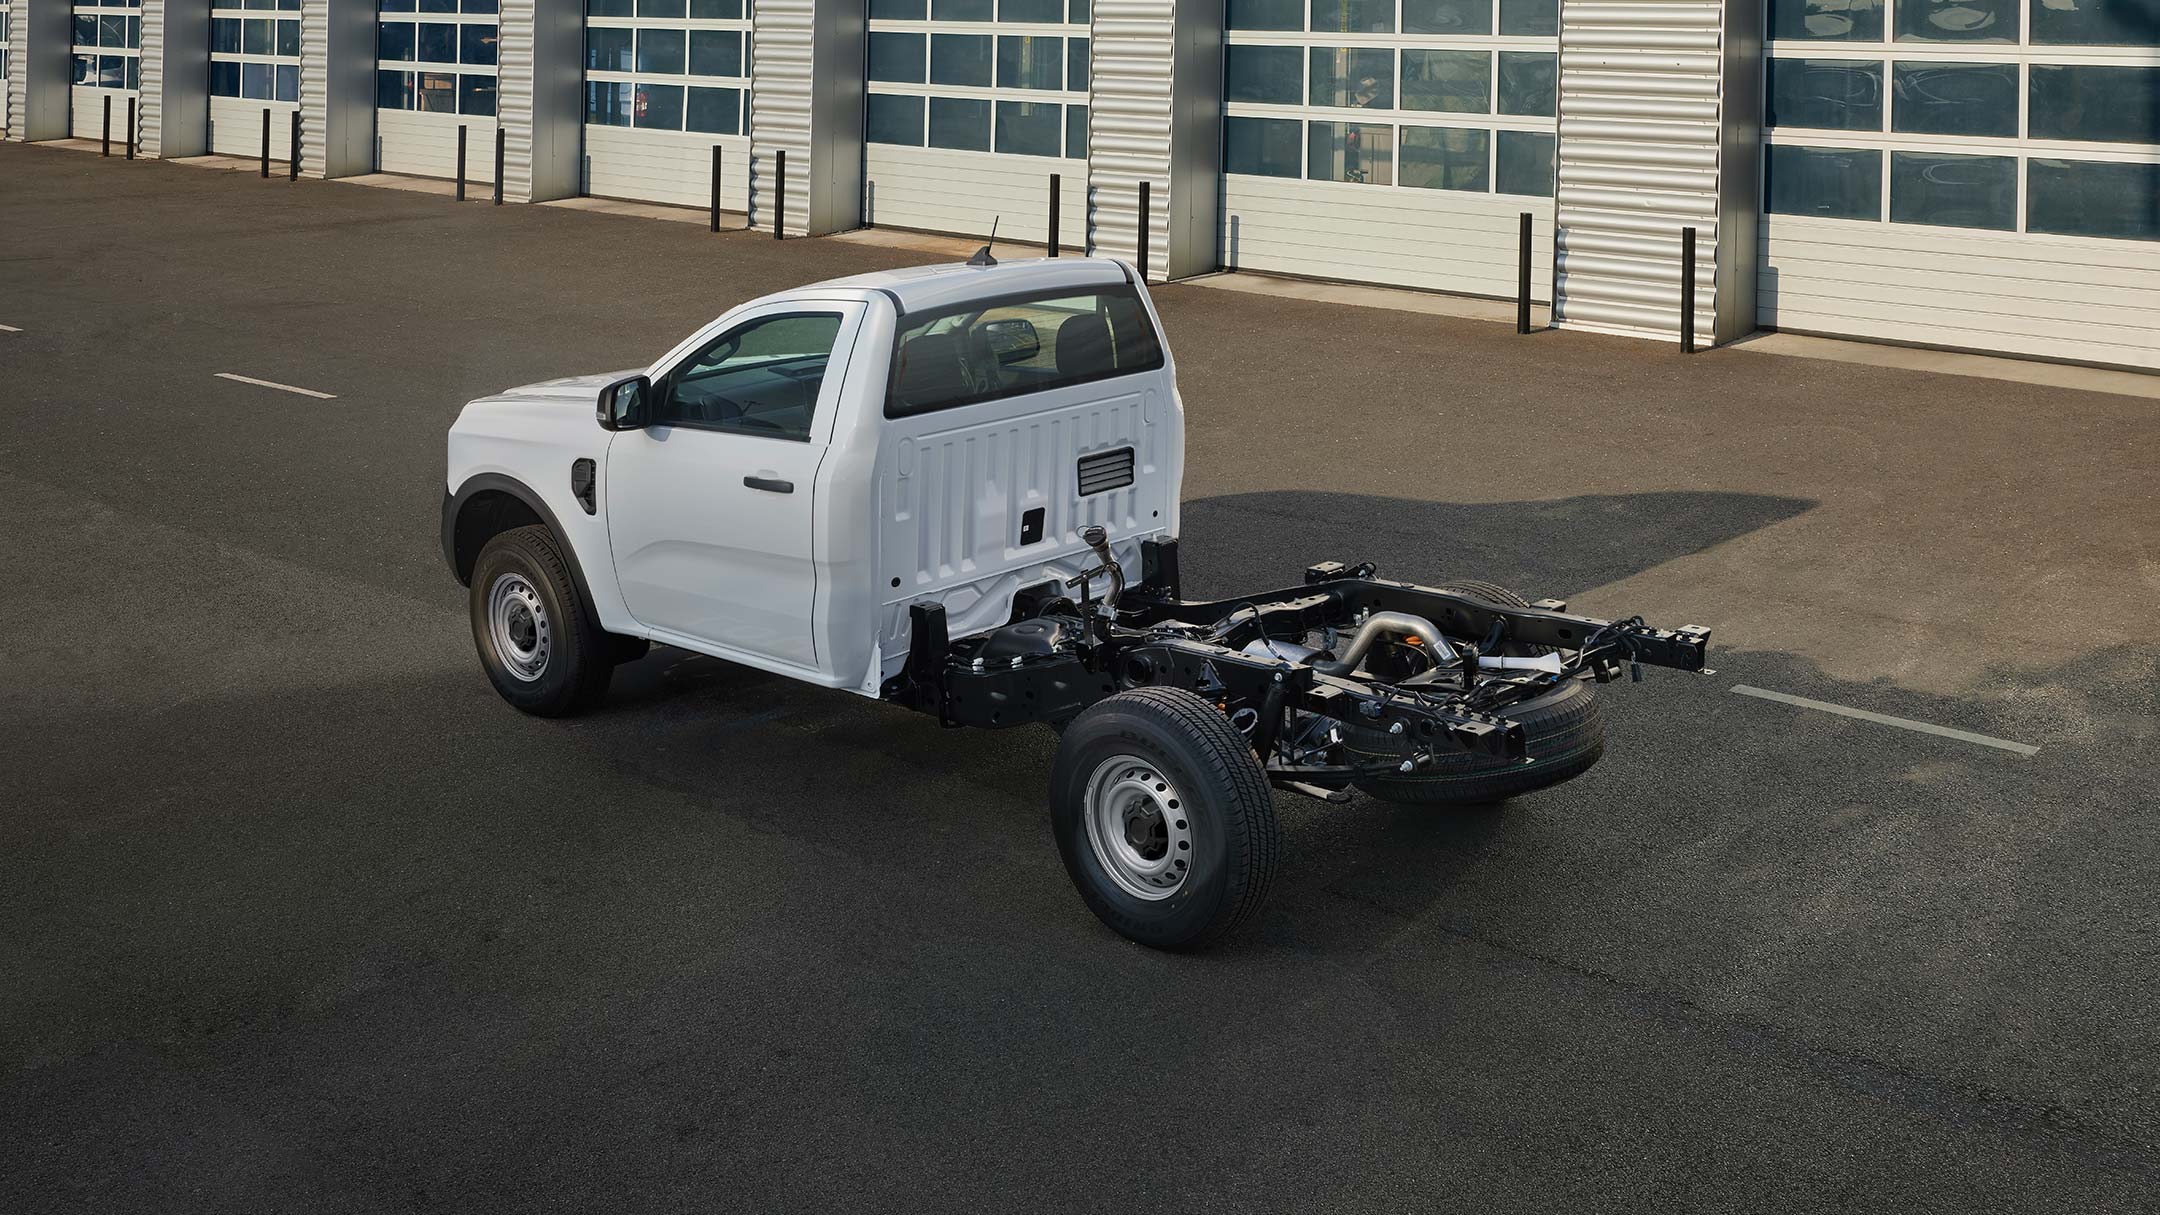 Ford Ranger Chassis Cab in a Street